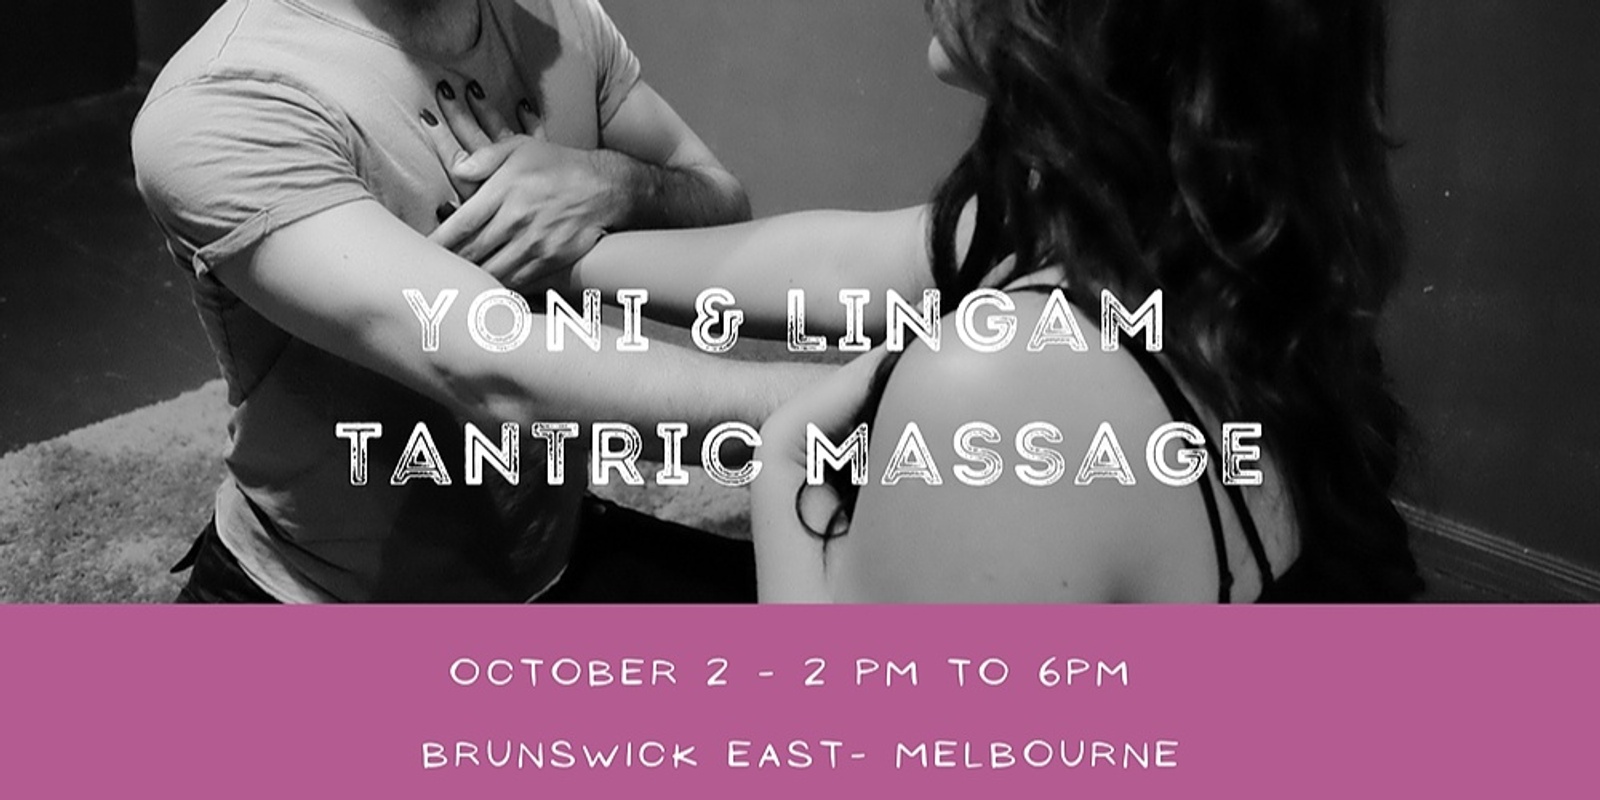 cheri irving recommends yoni and lingham massage pic